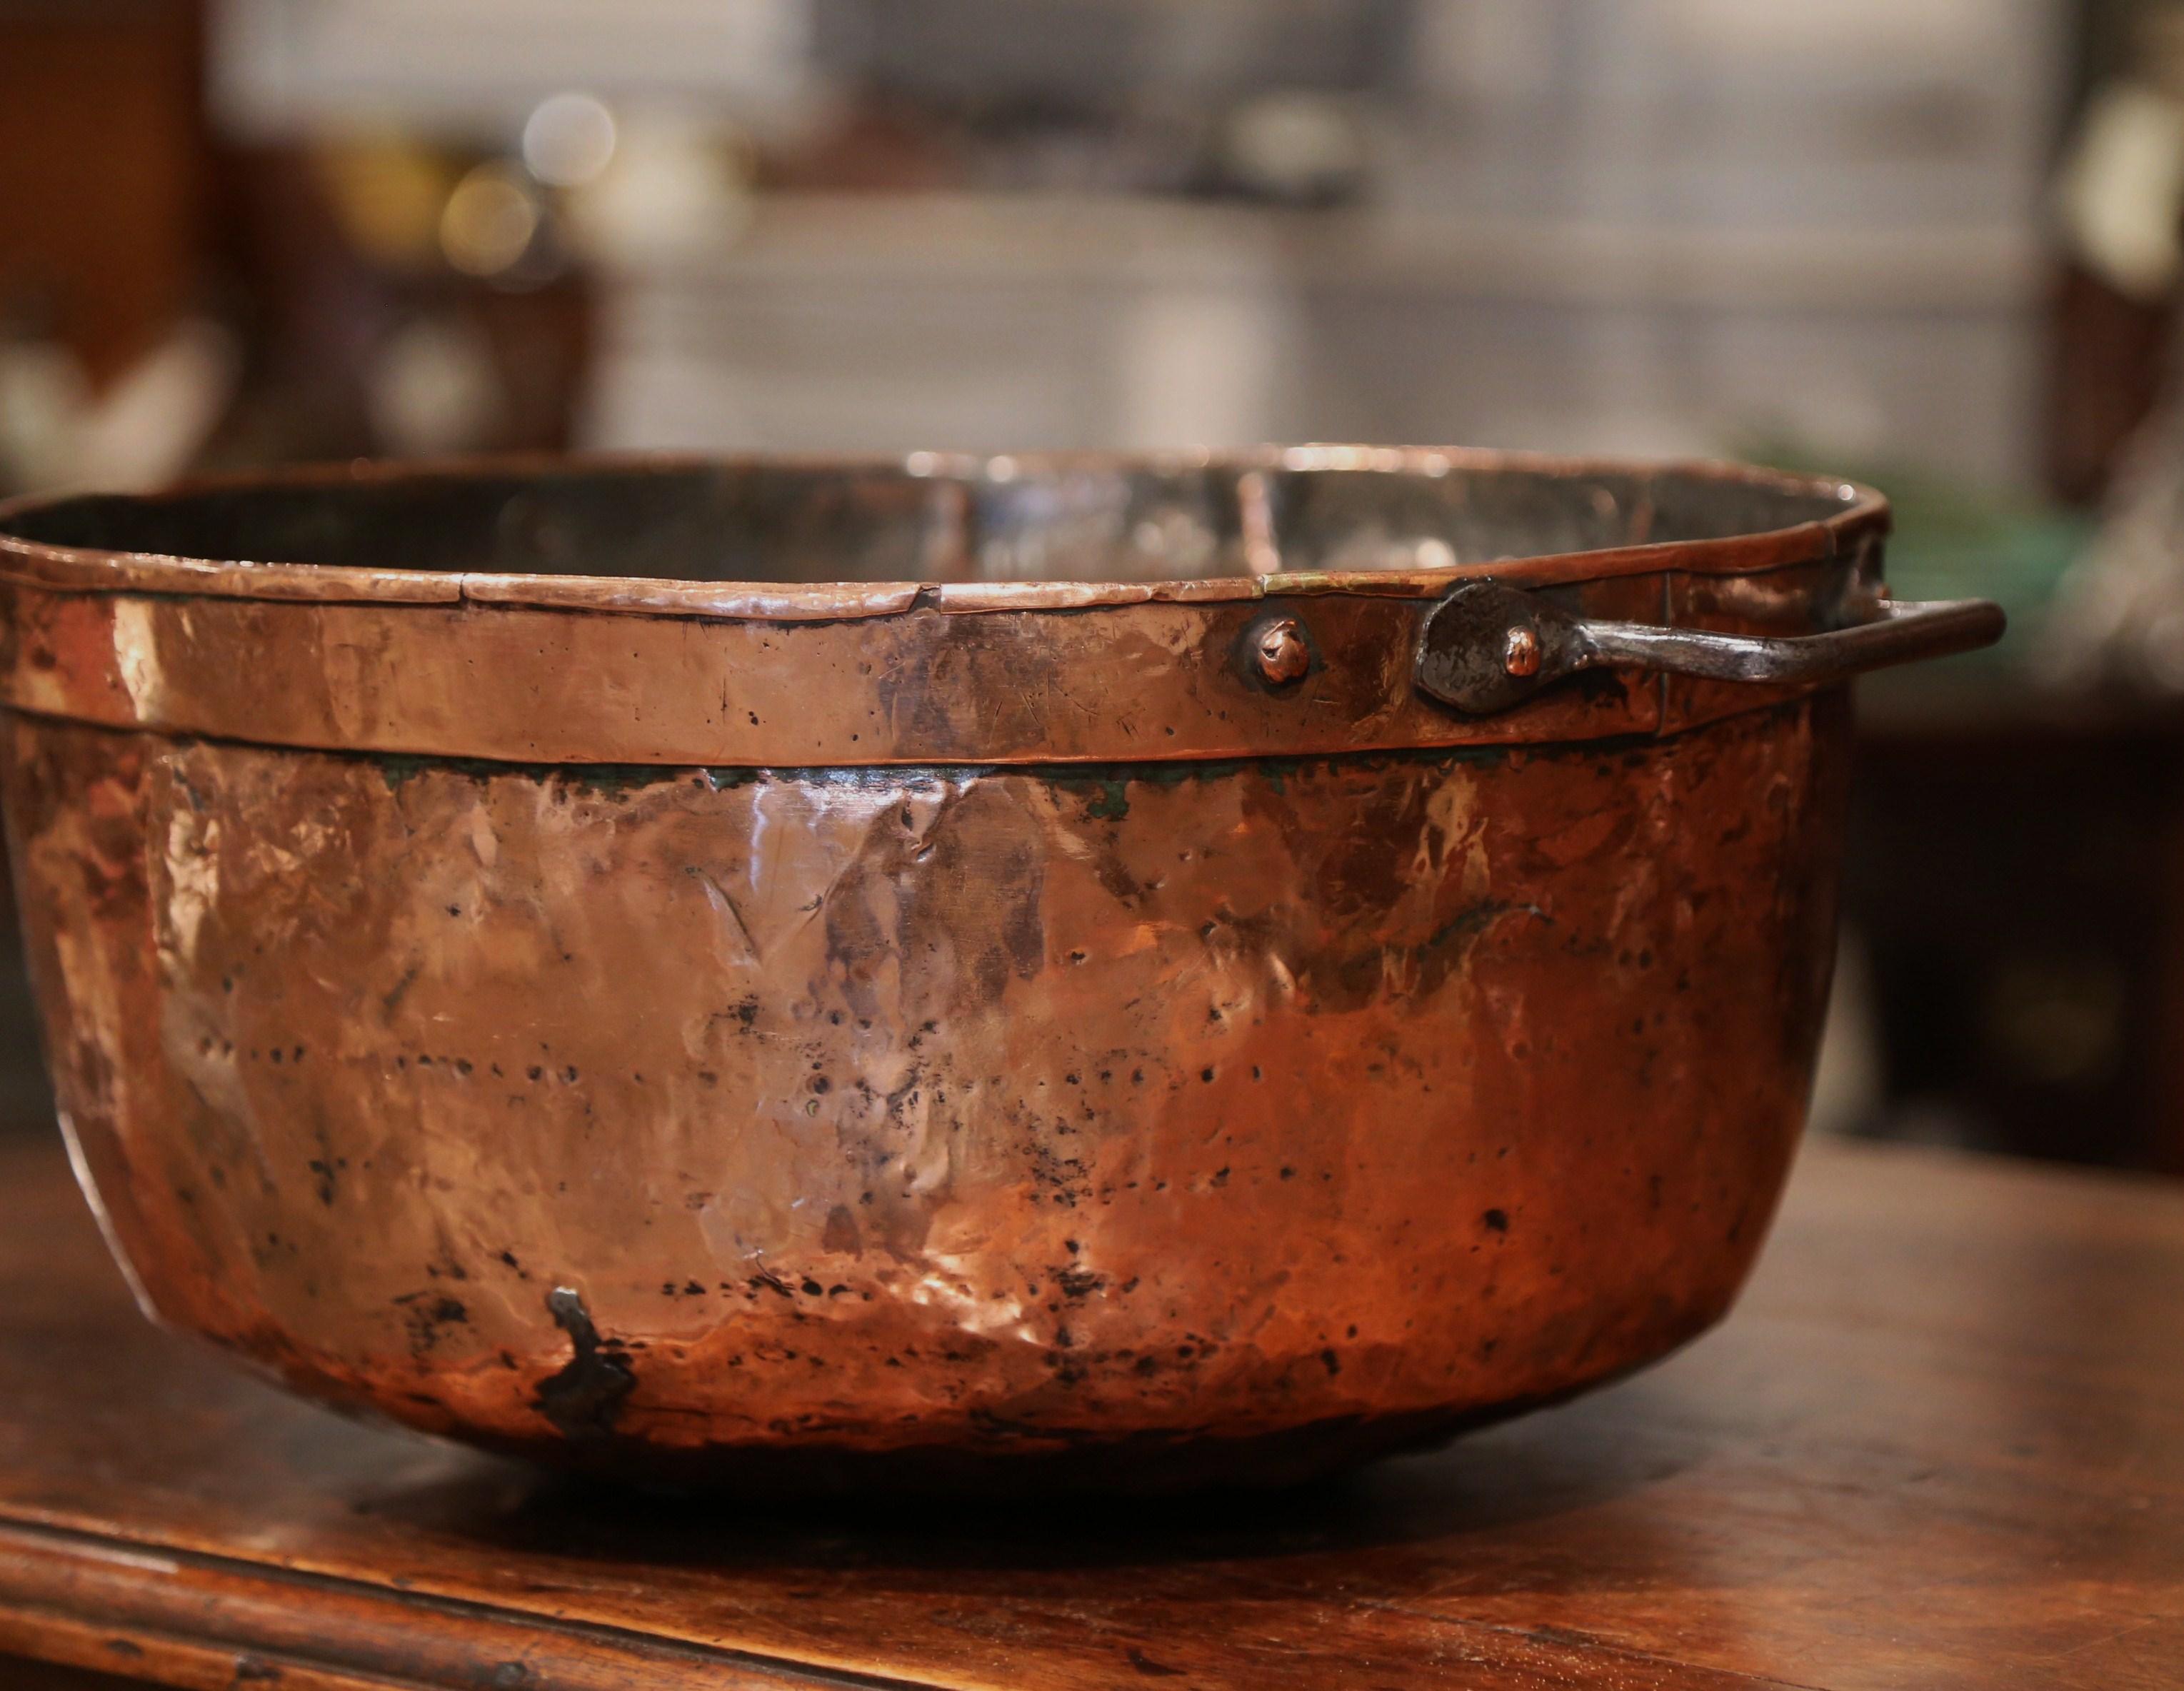 Rustic Mid-19th Century French Copper Jelly and Jam Boiling Bowl with Handles